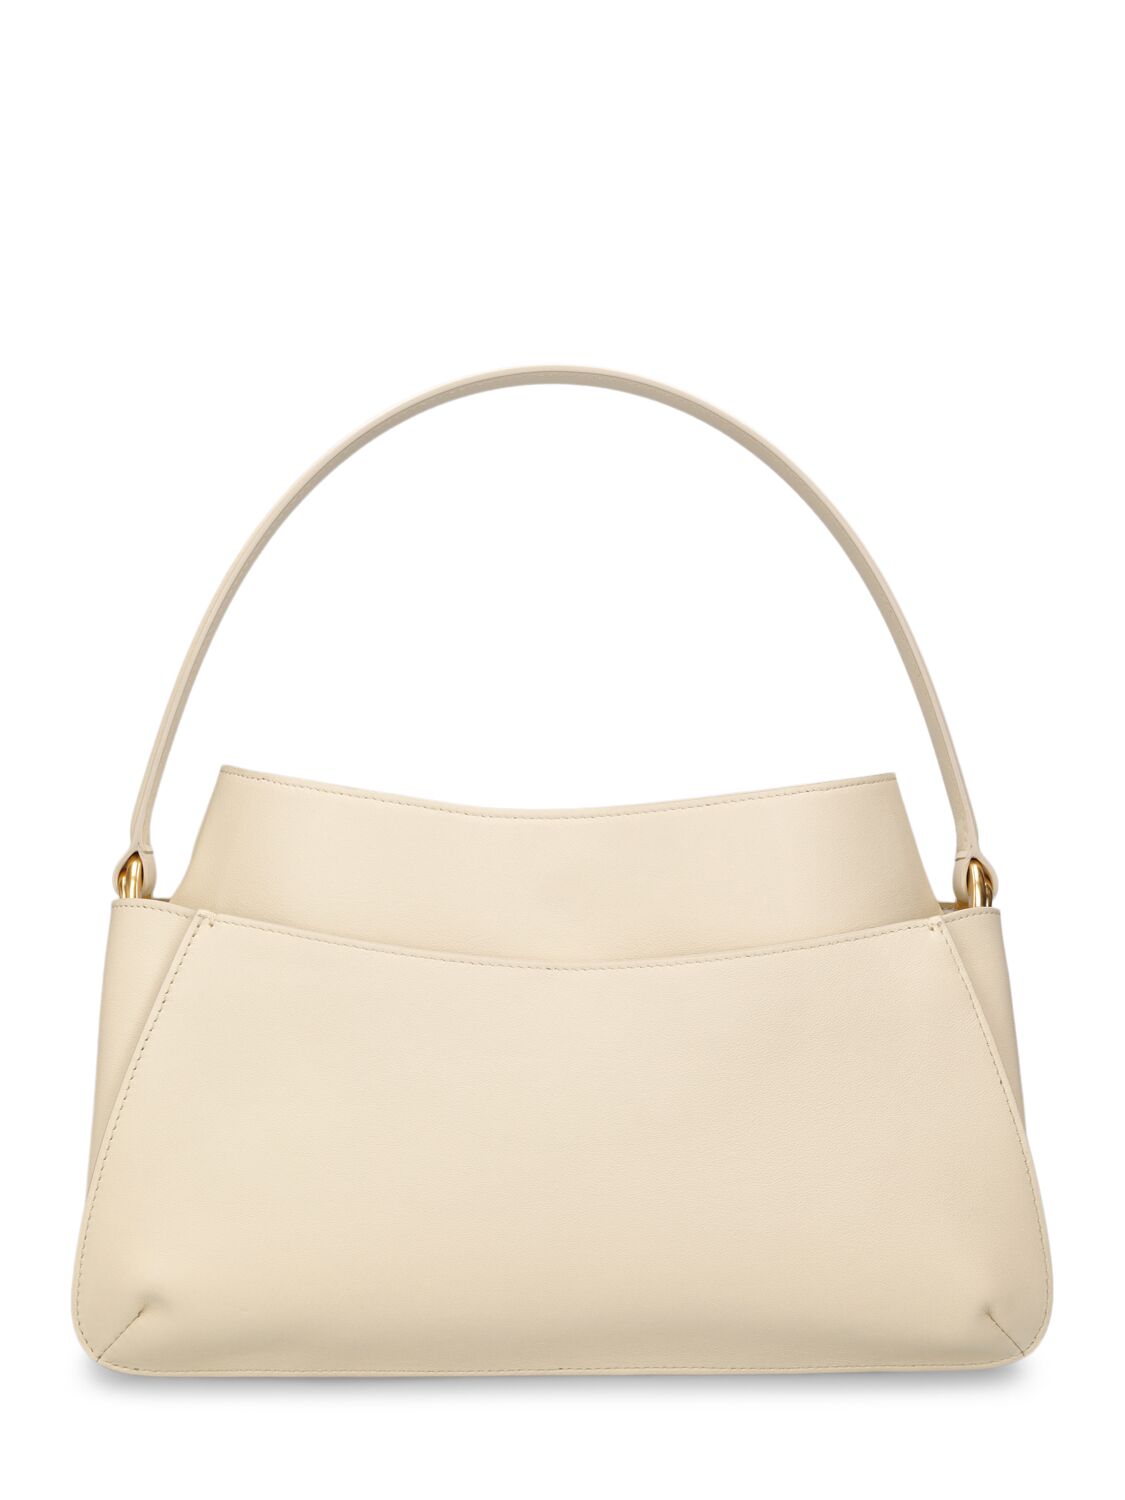 Shop Neous Erid Leather & Suede Shoulder Bag In White